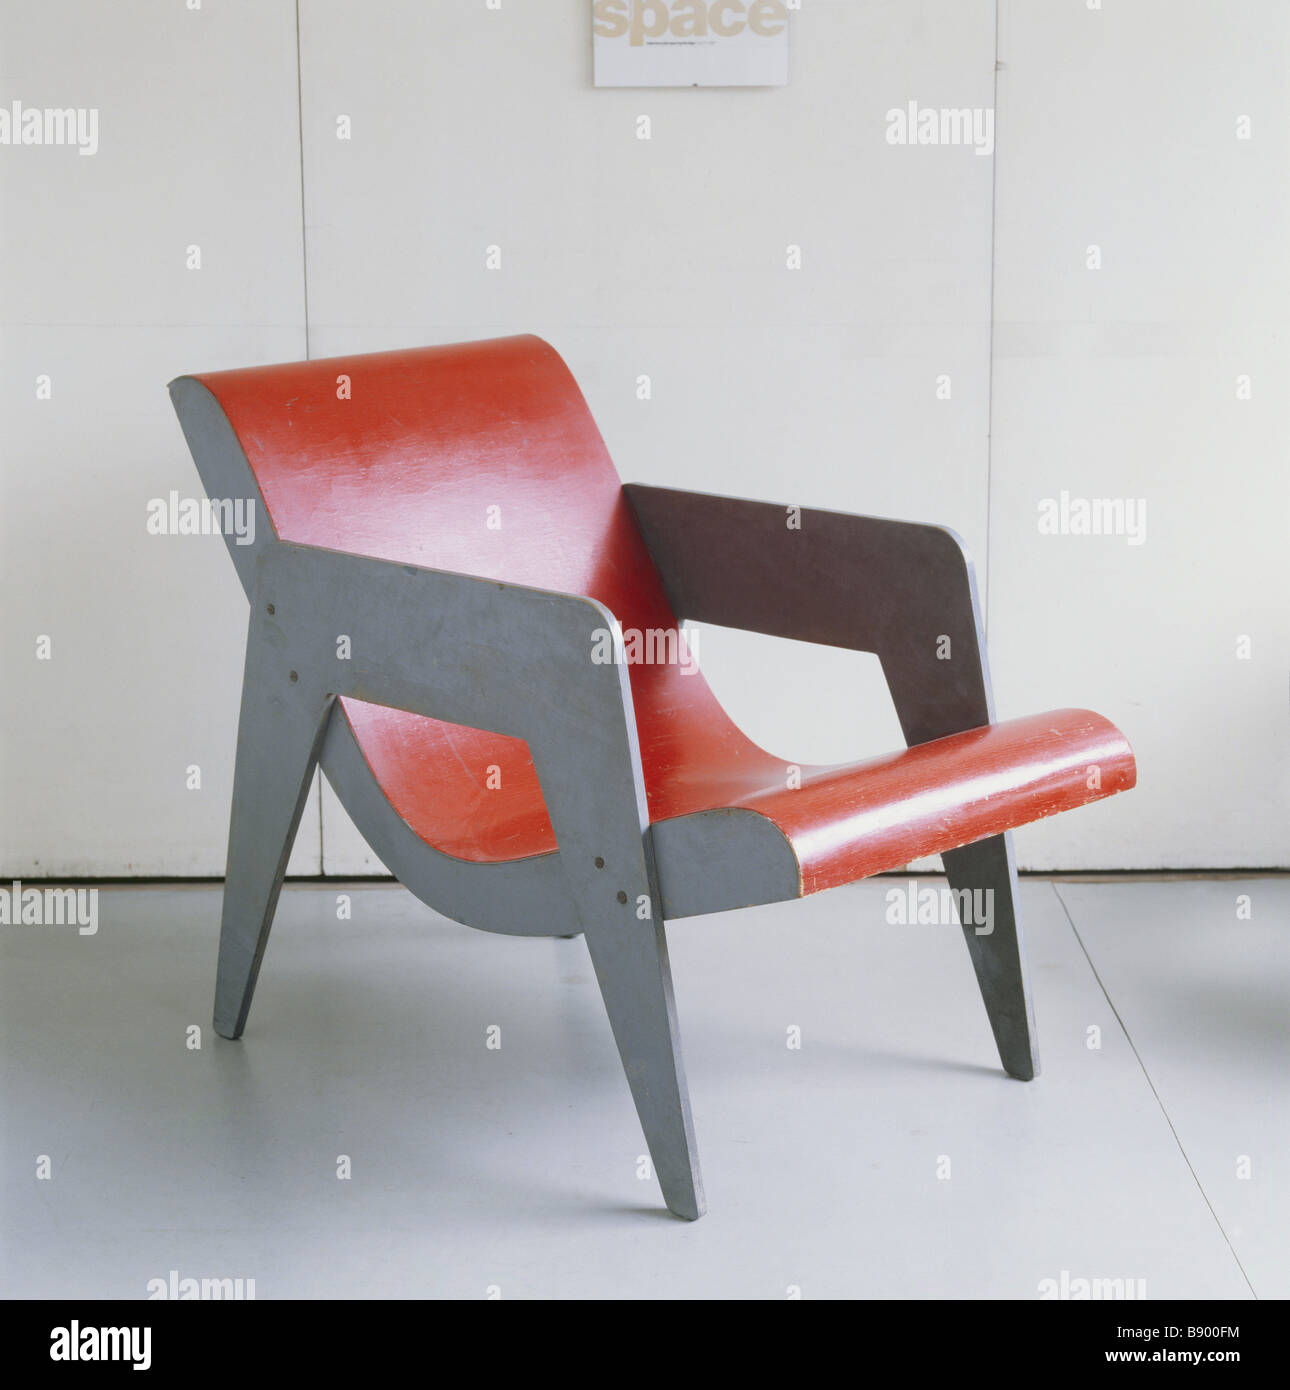 A Modernist red and grey chair at 2 Willow Road Hampstead London Stock Photo